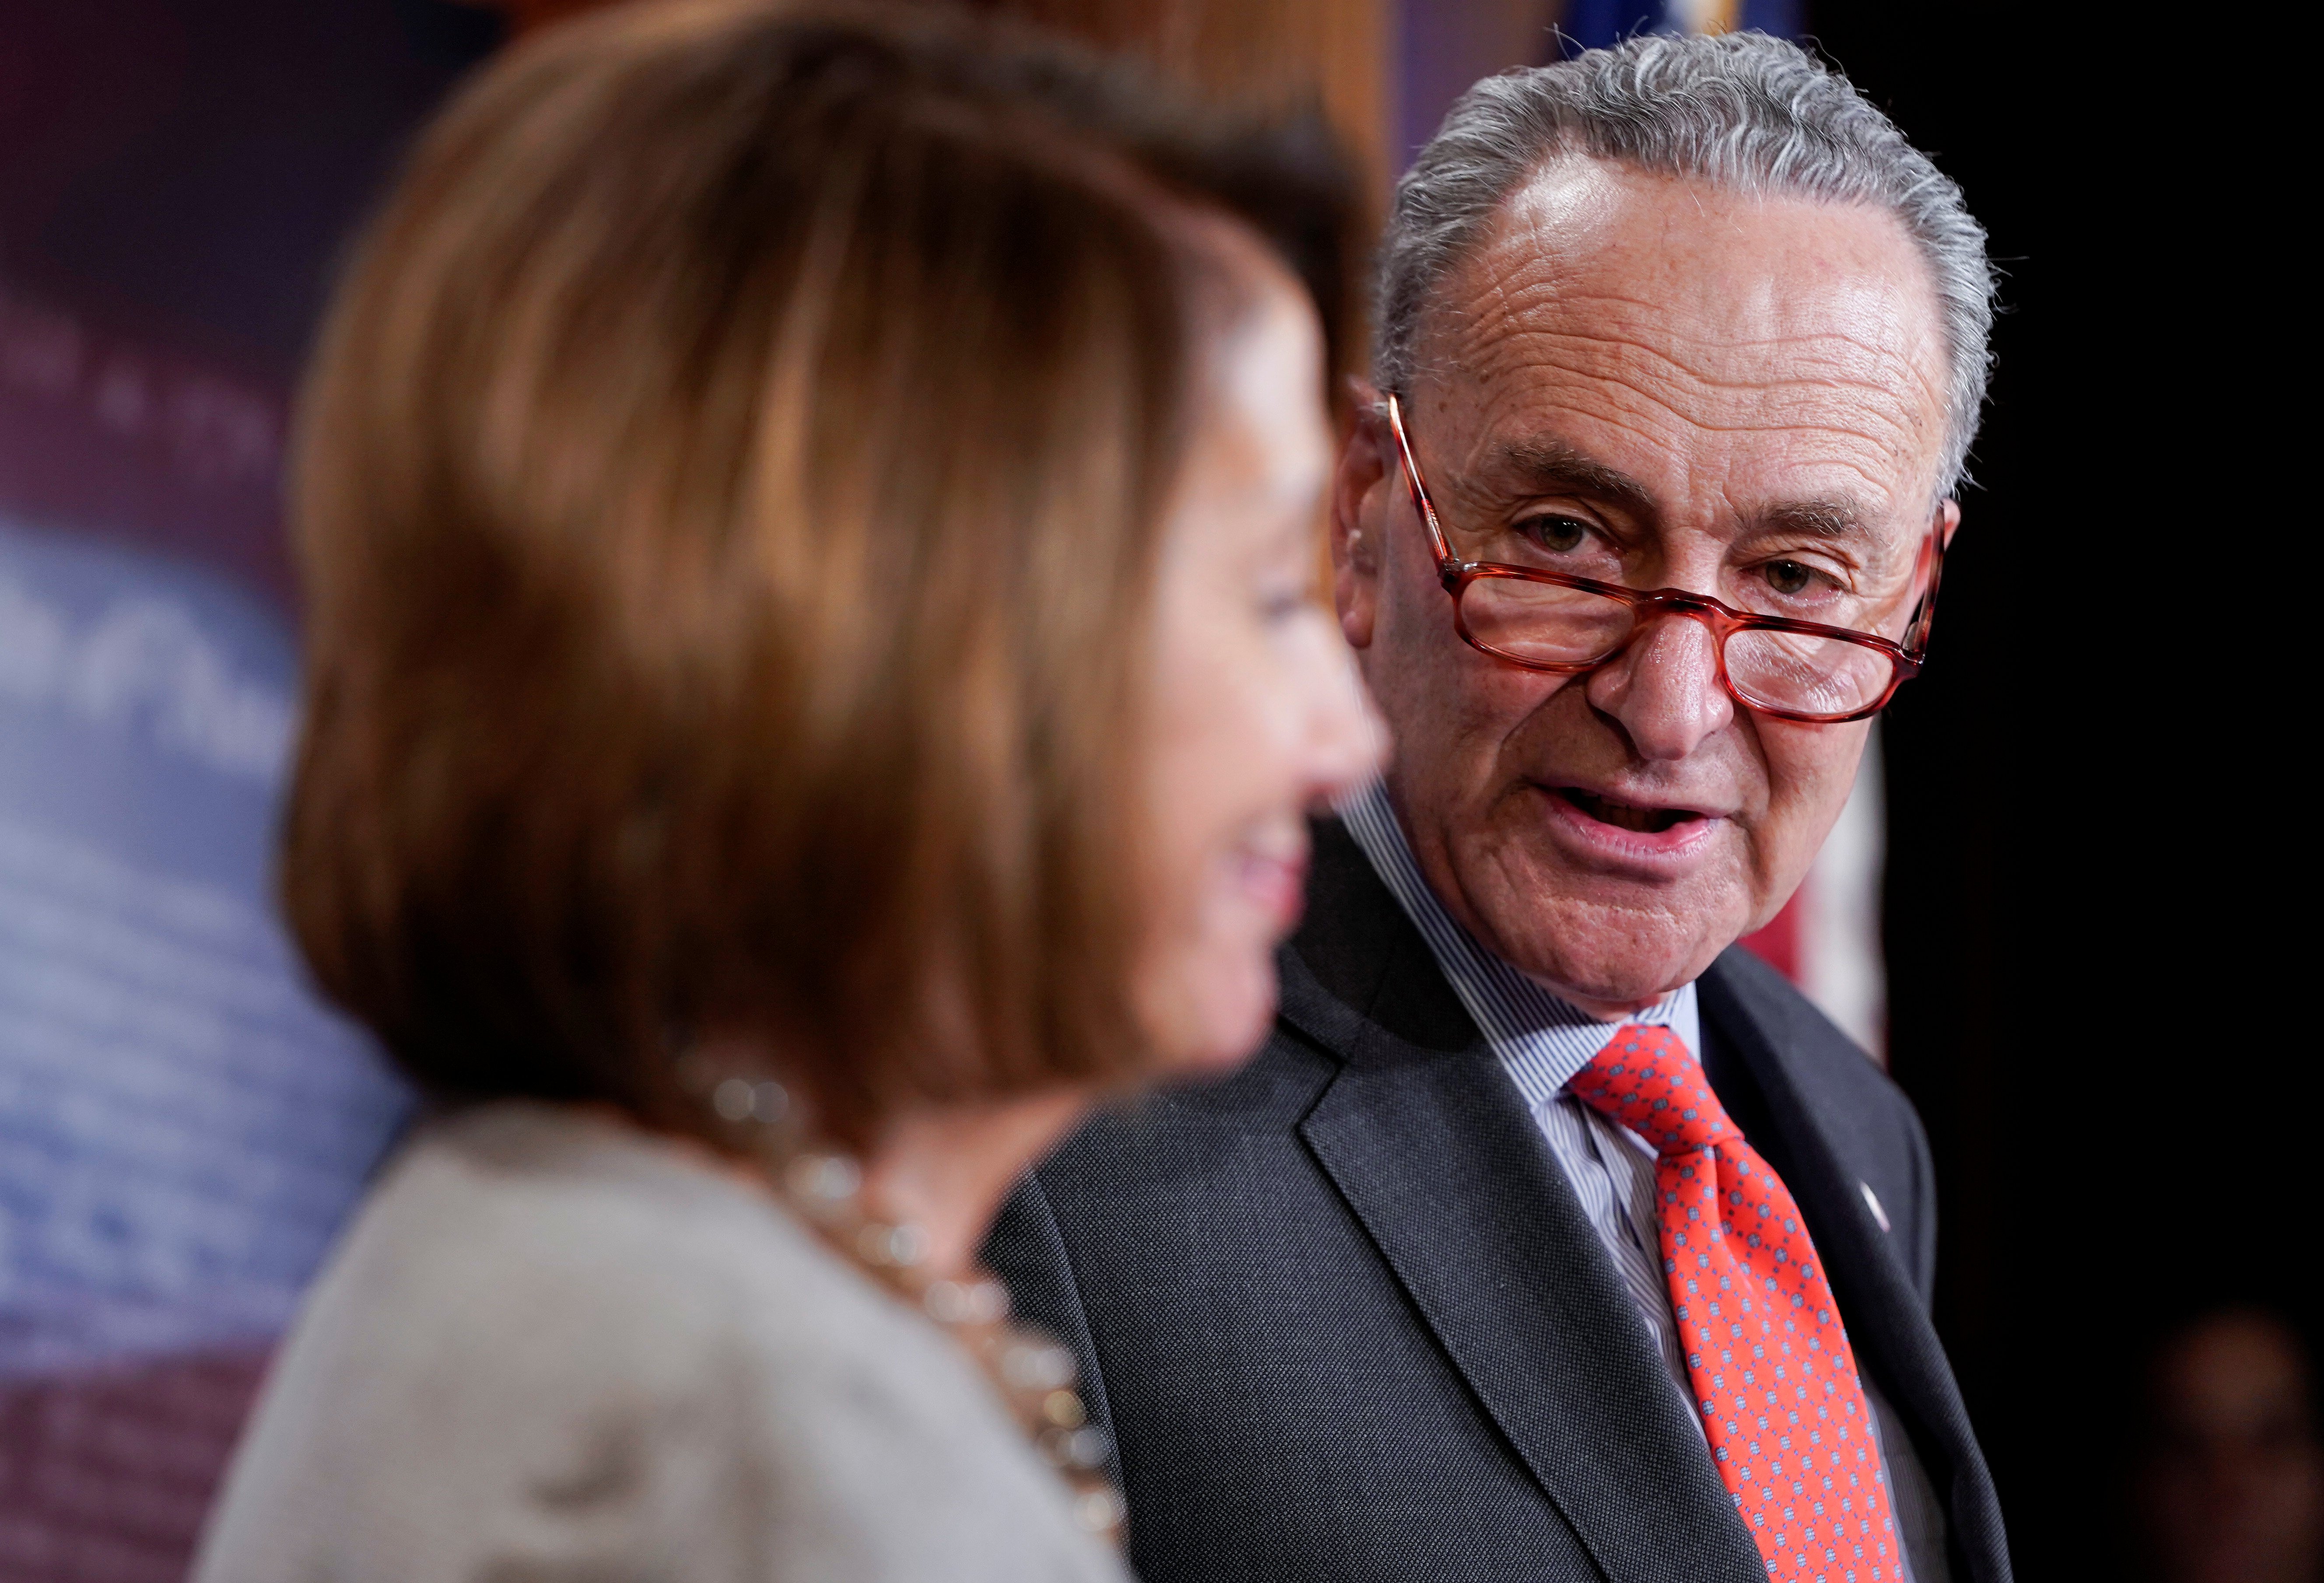 Democratic Congressional leaders Pelosi and Schumer speak after deal was reached to end partial government shutdown in Washington